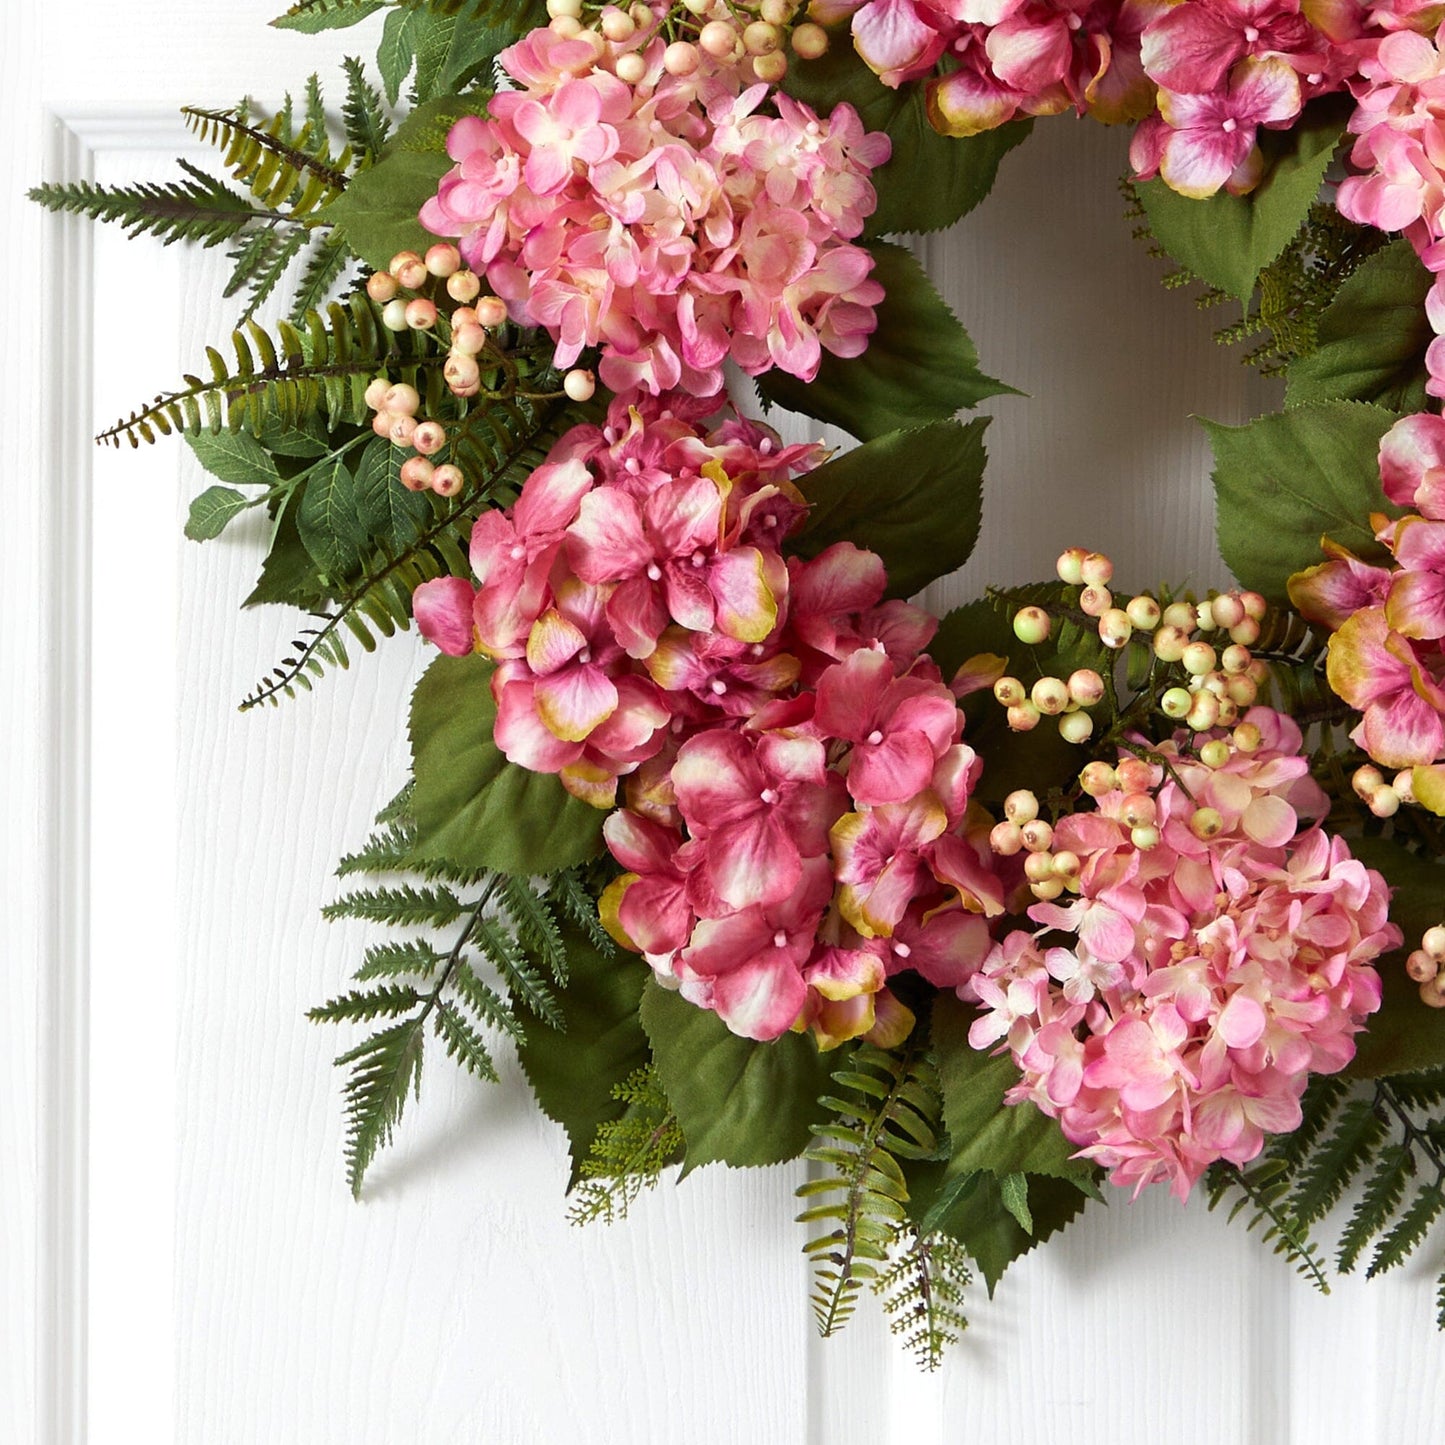 24” Artificial Hydrangea Berry Wreath by Nearly Natural